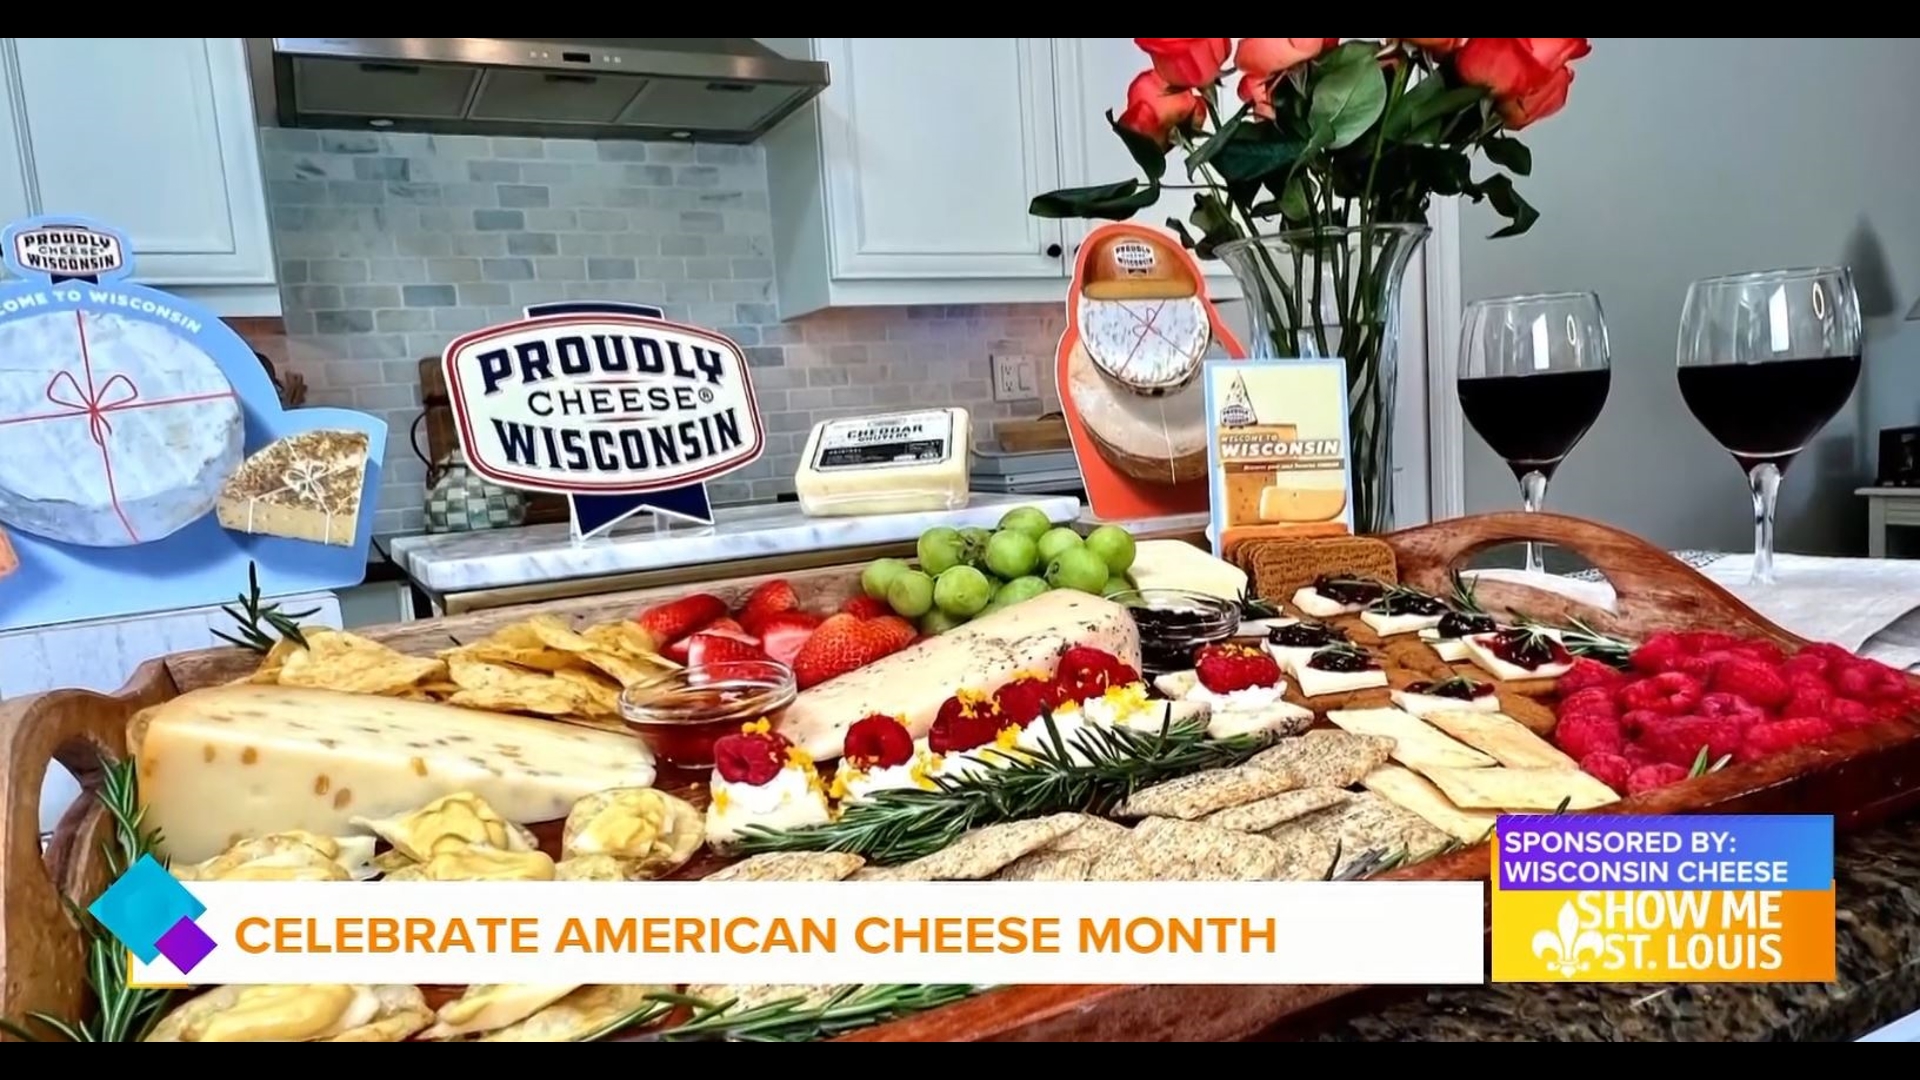 From recipes for you or for guests, Wisconsin Cheese has everything you need for Cheese Month.